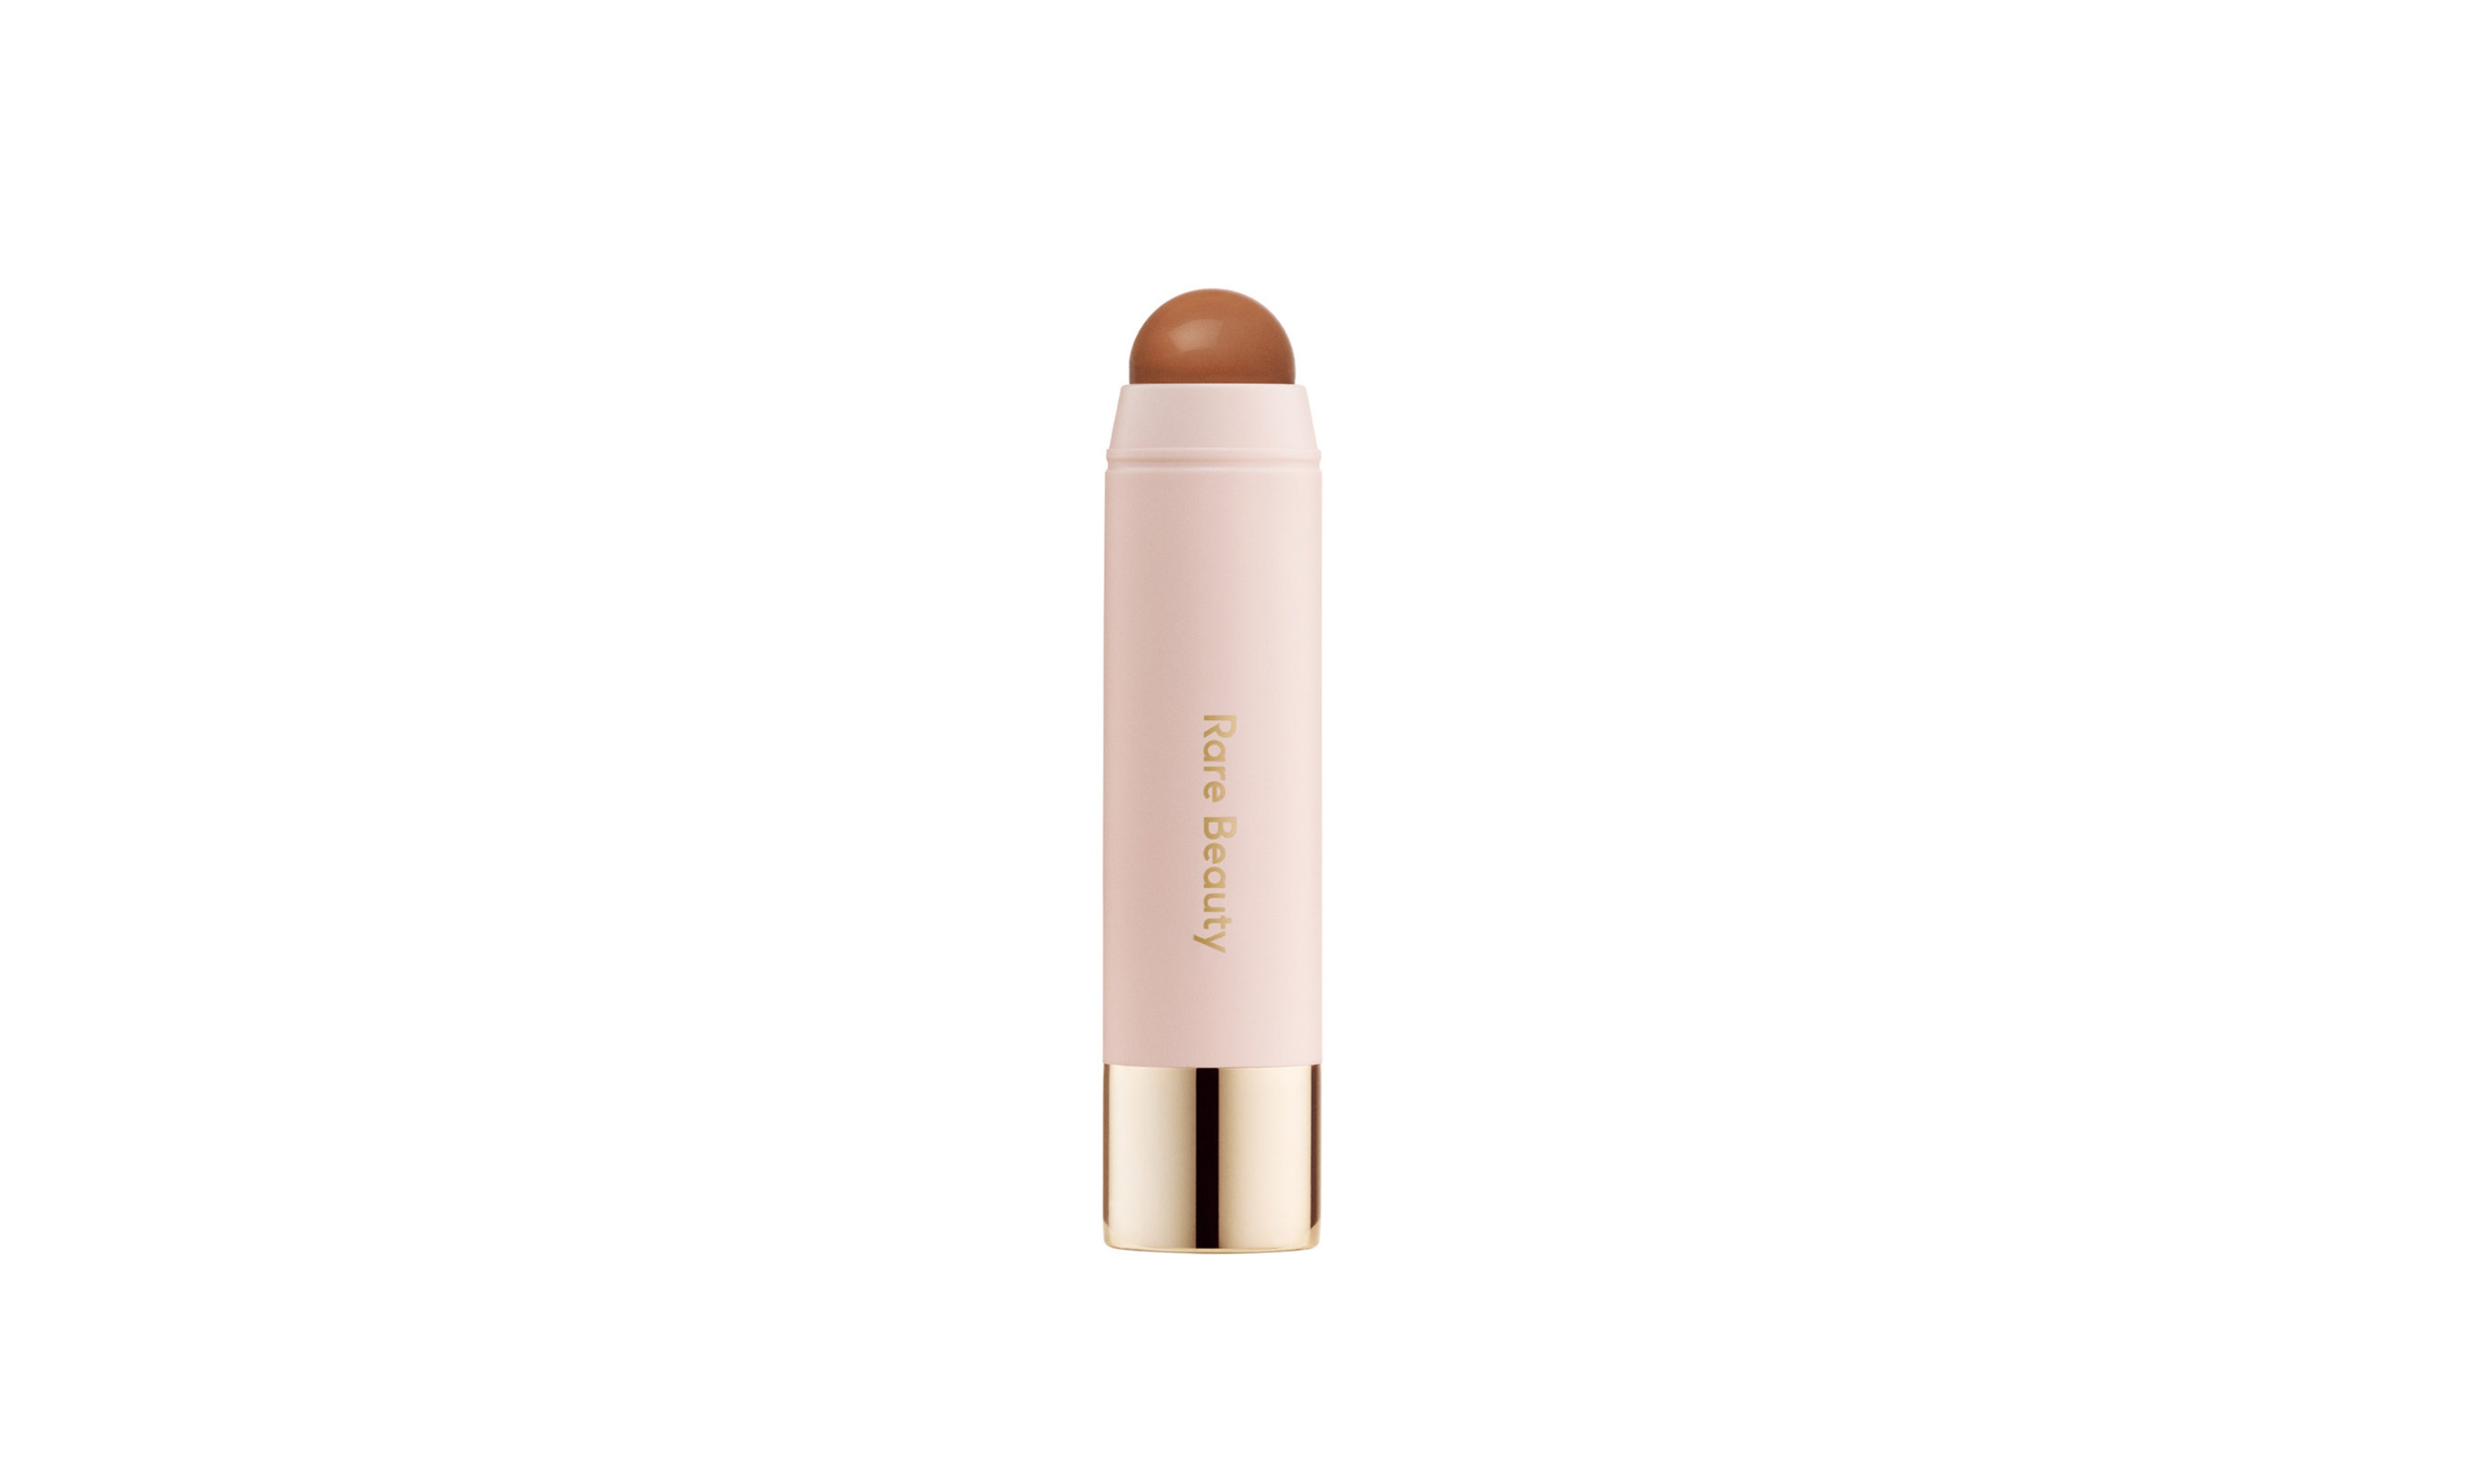 'Warm Wishes Effortless Bronzer Stick' by Rare Beauty.